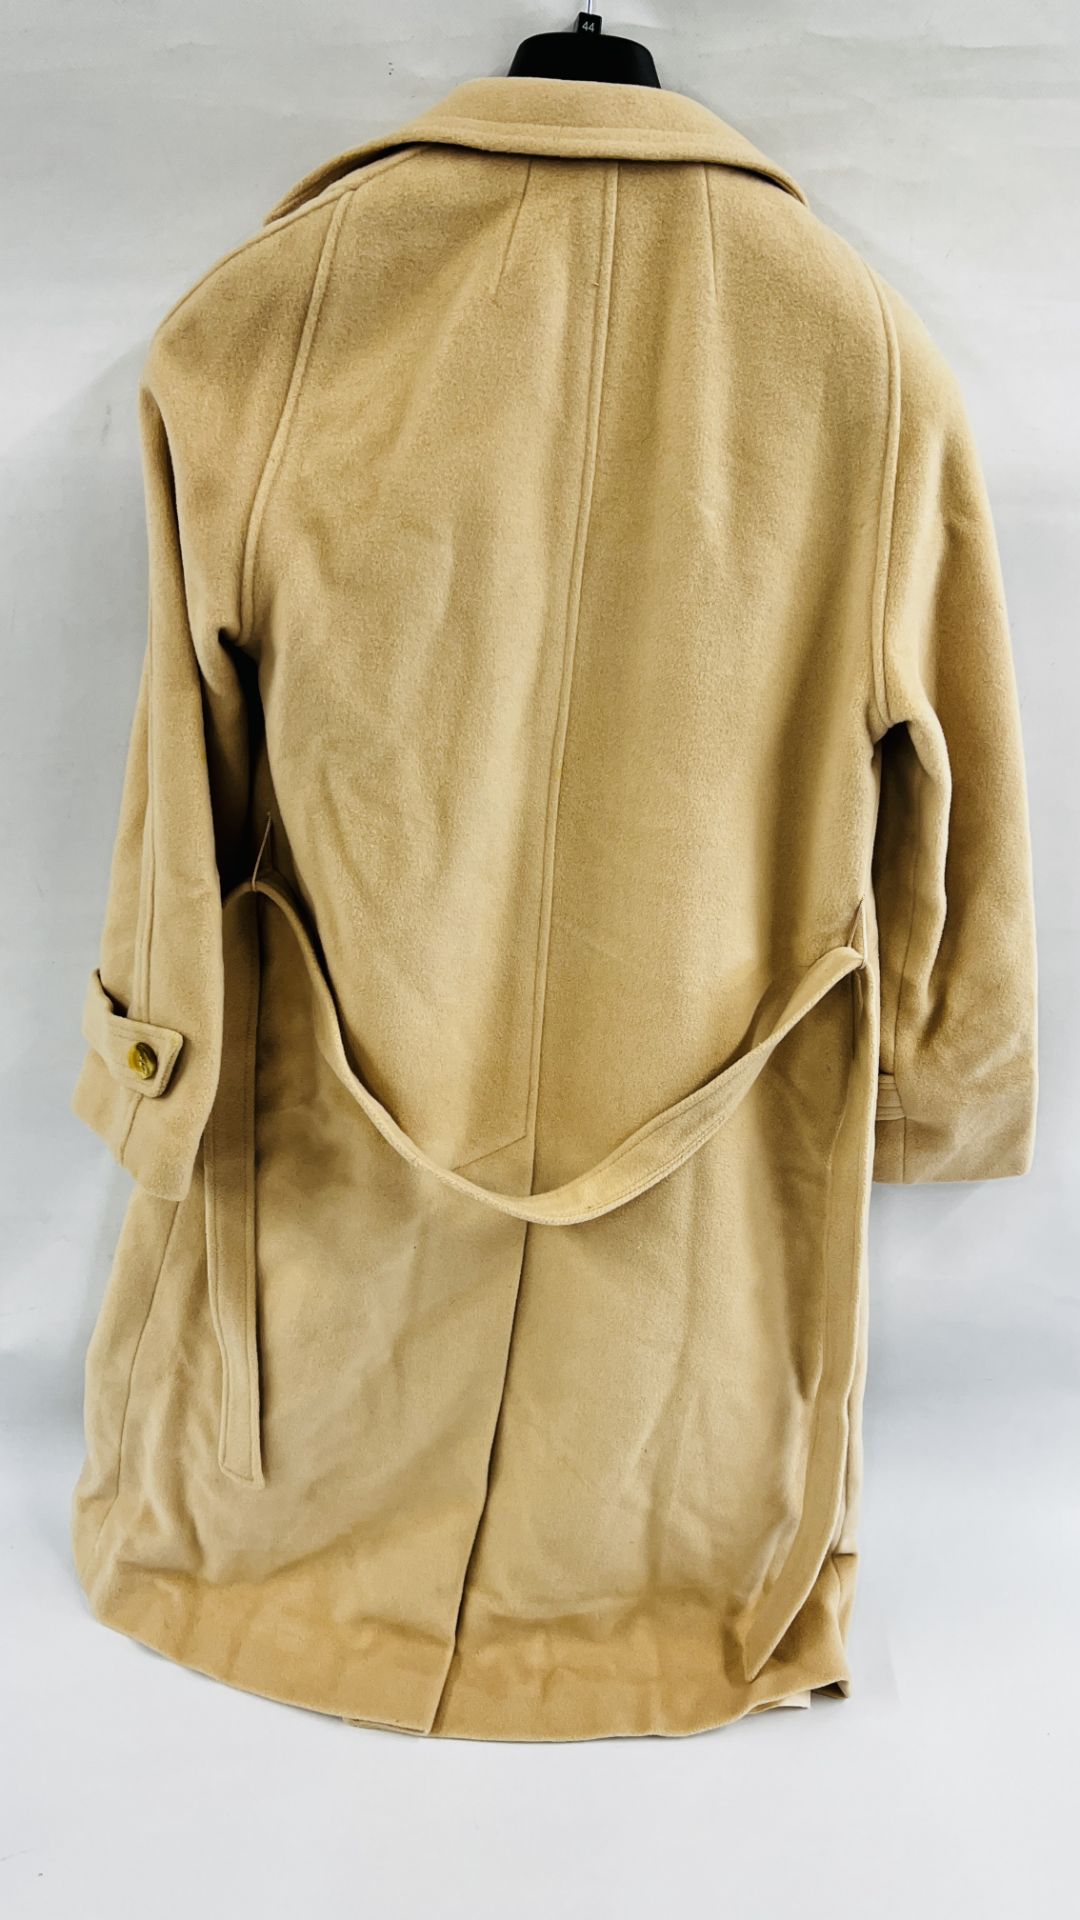 A LADIES CASHMERE AND WOOL COAT MARKED "CZARINA" (SIZE NOT SPECIFIED). - Image 6 of 6